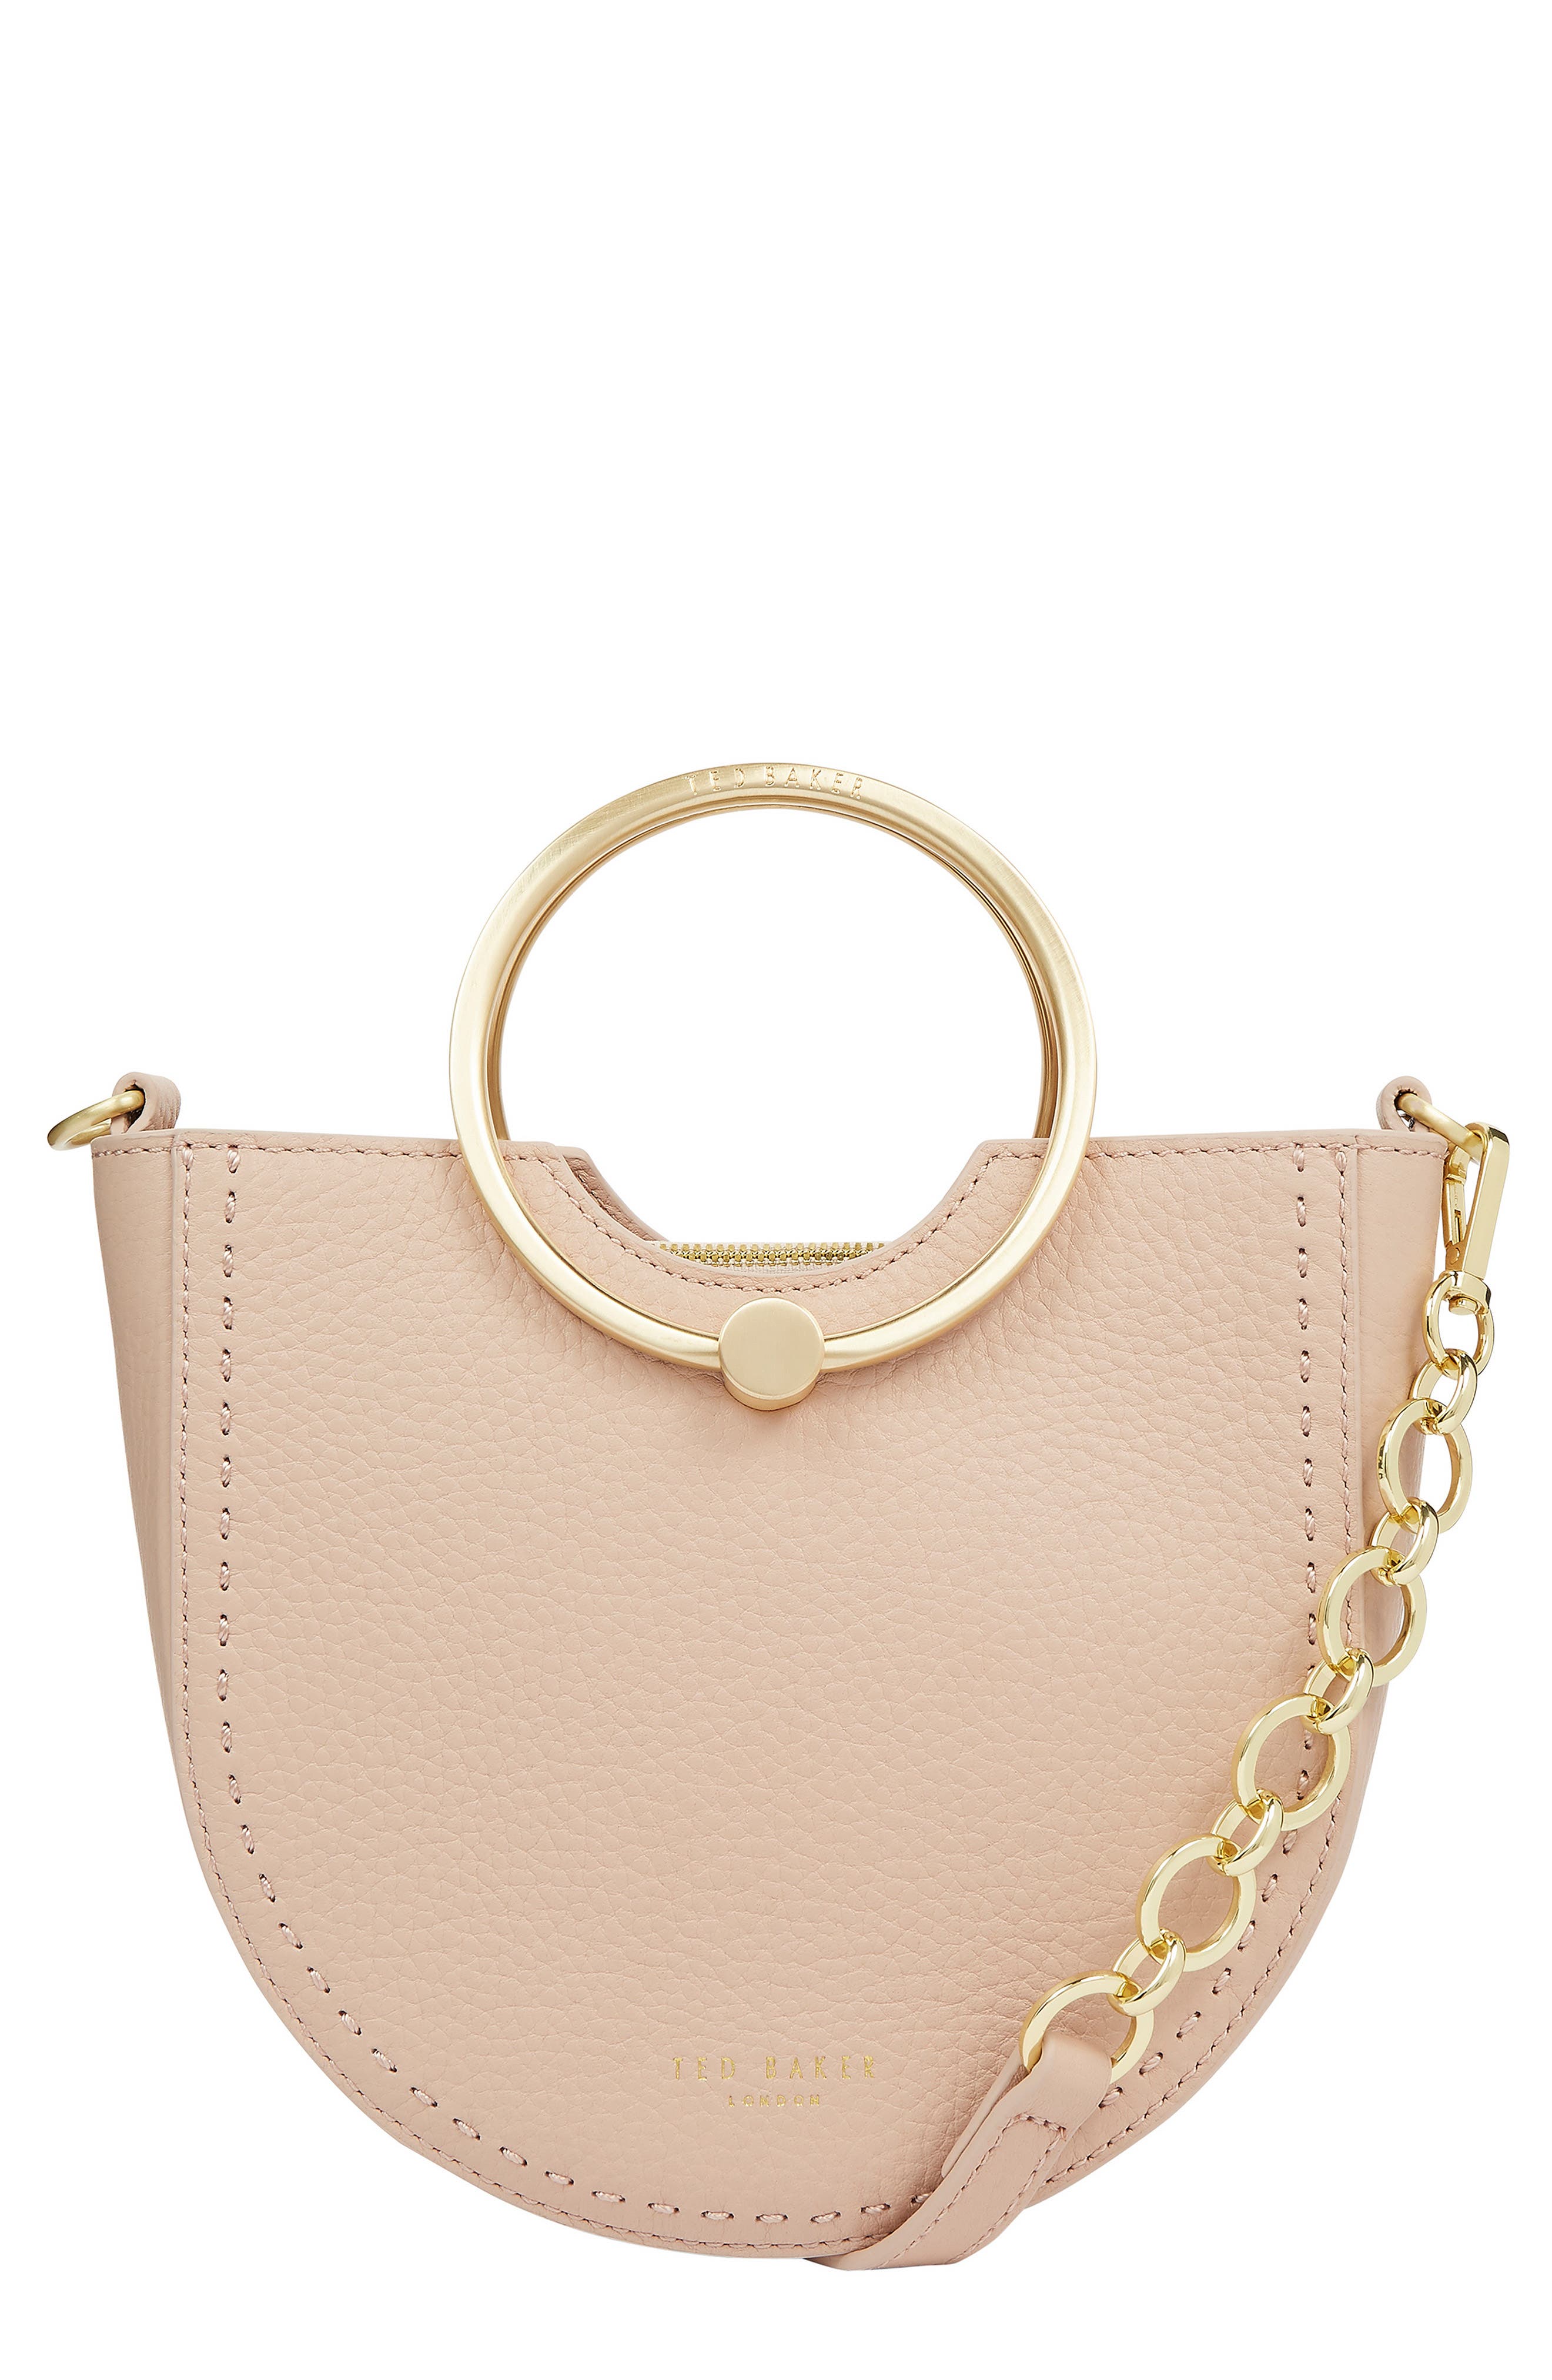 Ted Baker London Maryse Knotted Top Handle Crossbody Bag